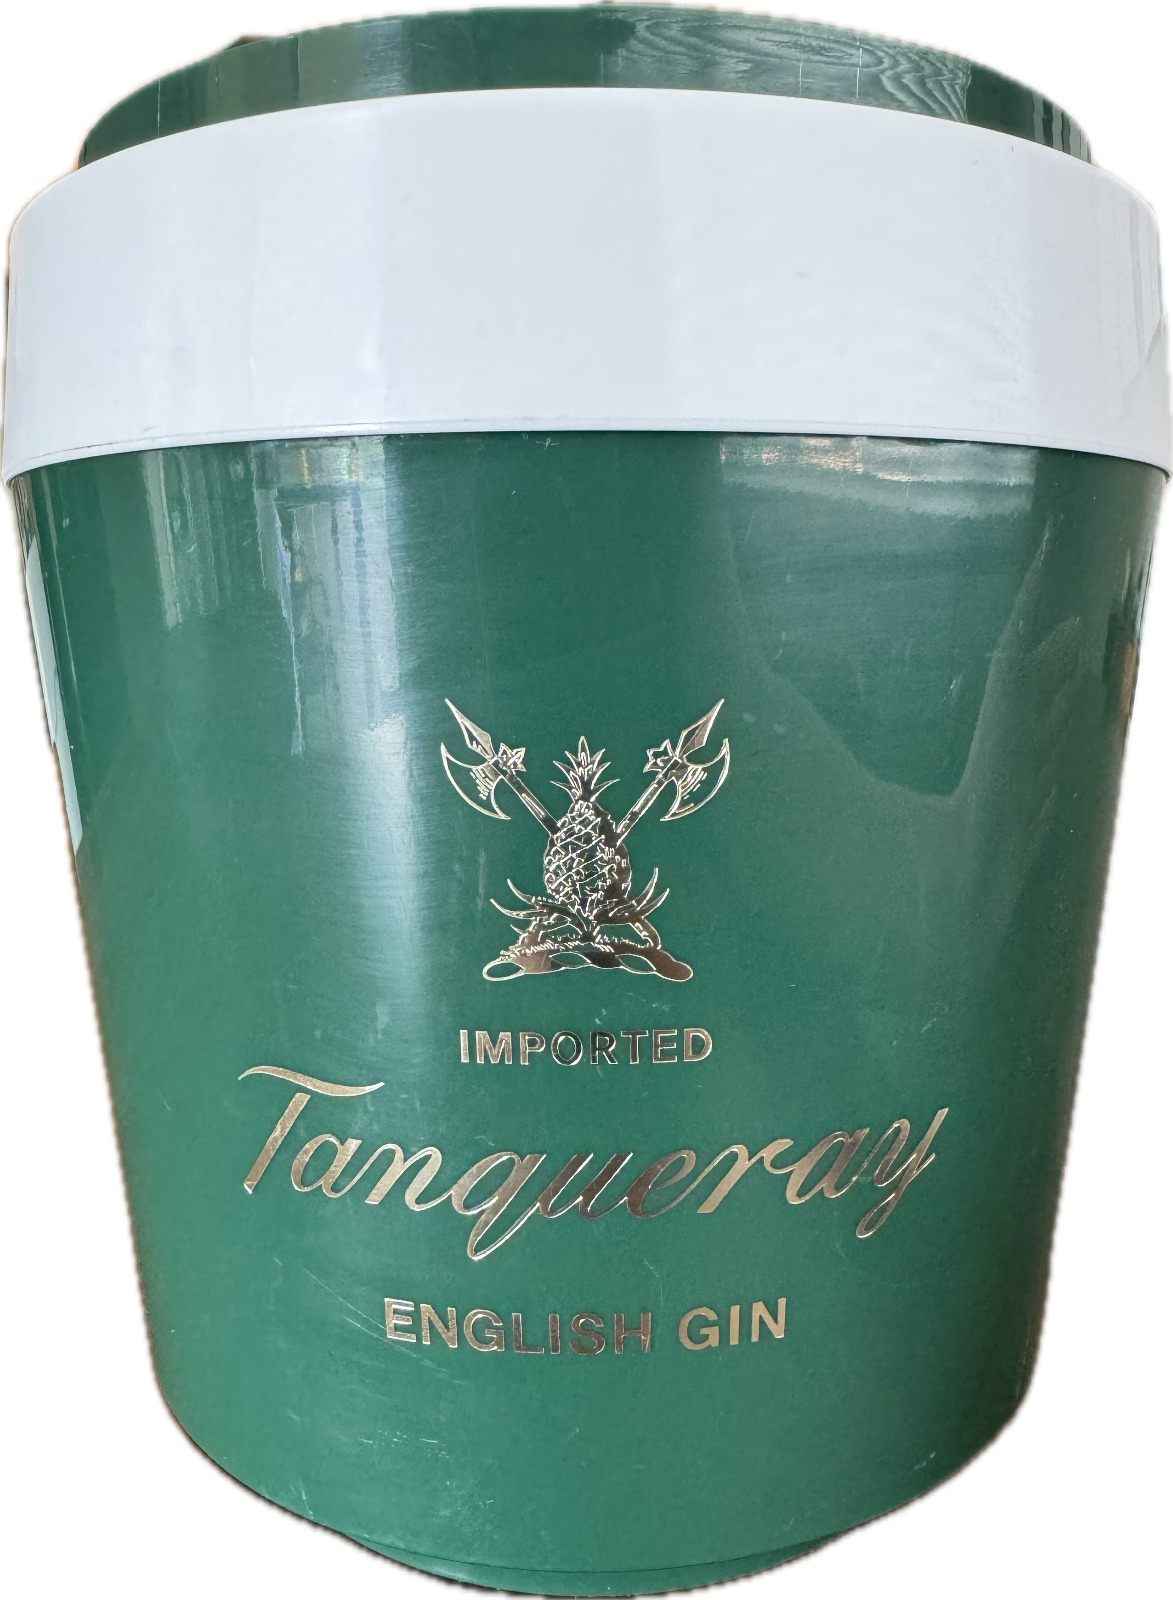 Vintage Rare Imported Tanqueray English Gin Ice Bucket Green Insulated Stewart